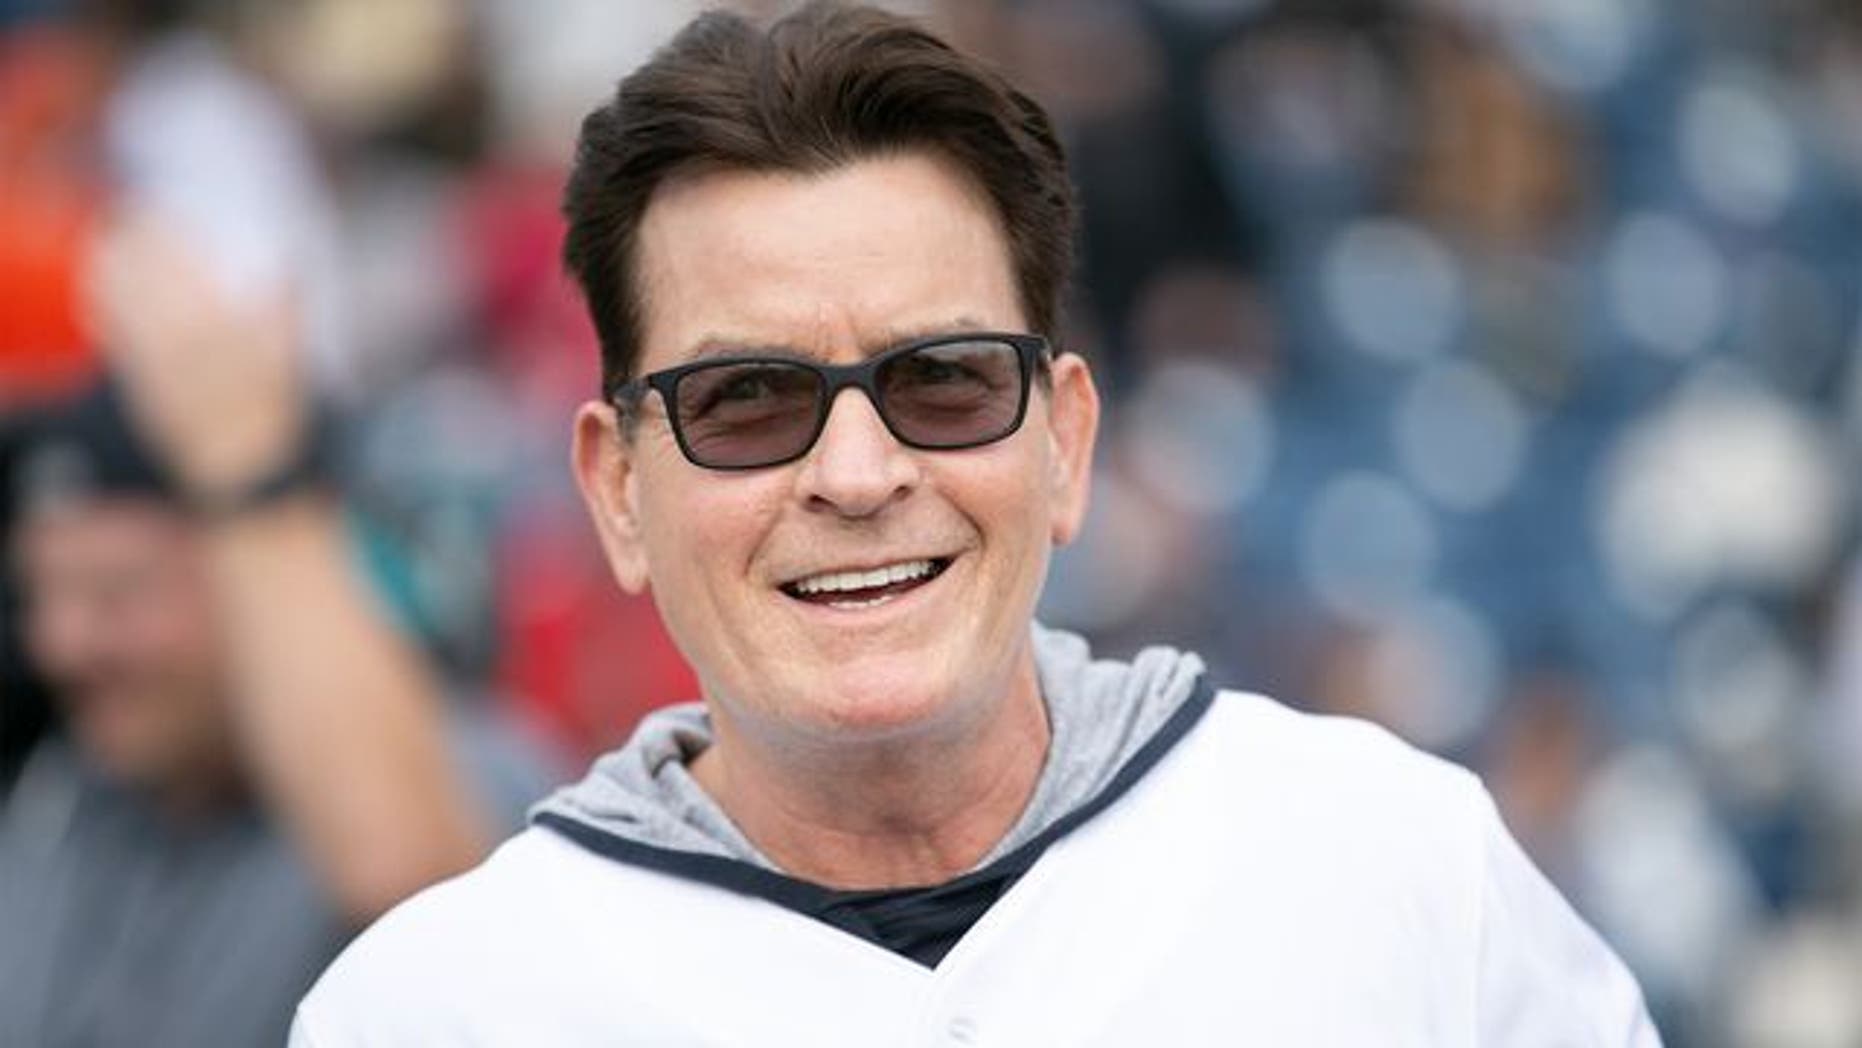 Charlie Sheen cuts $1.5M from Beverly Hills bachelor pad asking price